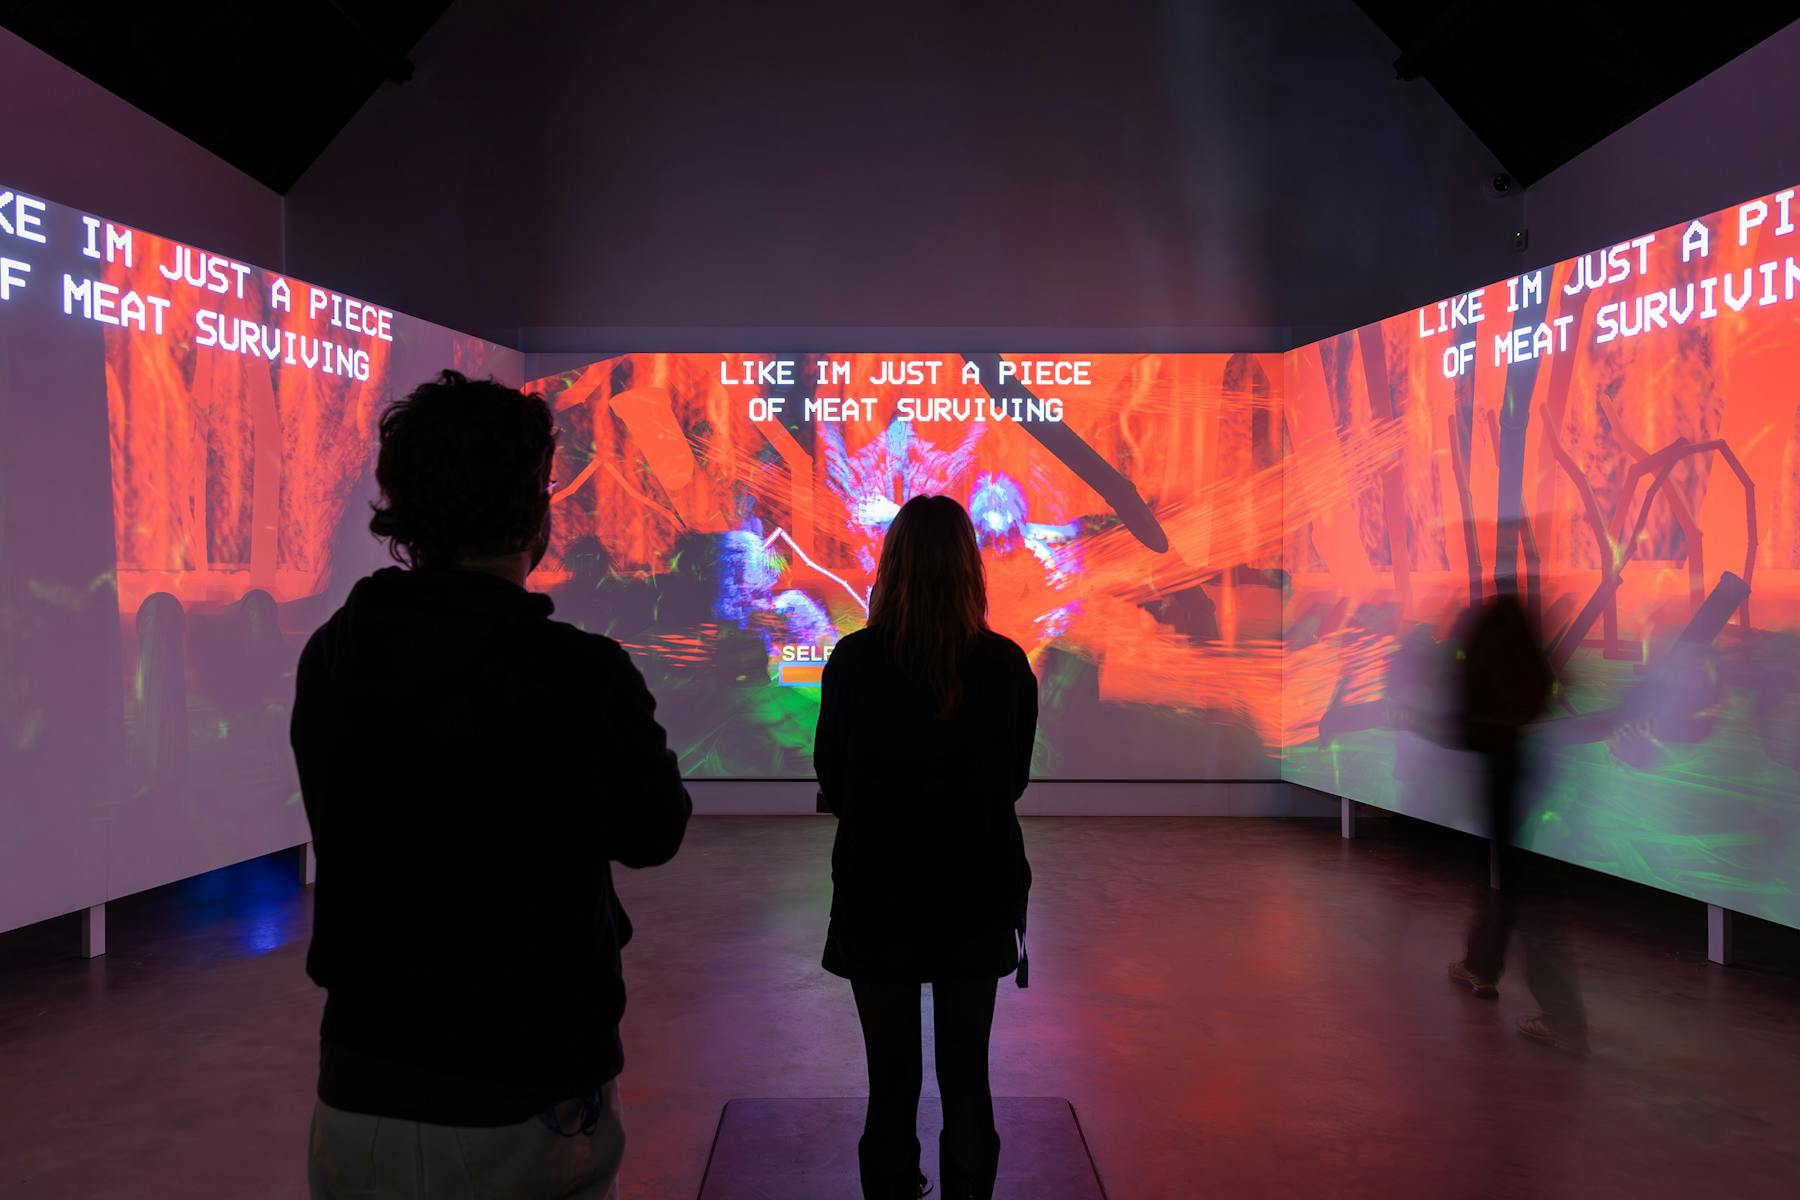 a photograph of three large wall-sized screen with colourful projects. There are three blurry figures in the foreground.Text on the screens reads 'LIKE IM JUST A PIECE OF MEAT SURVIVING'